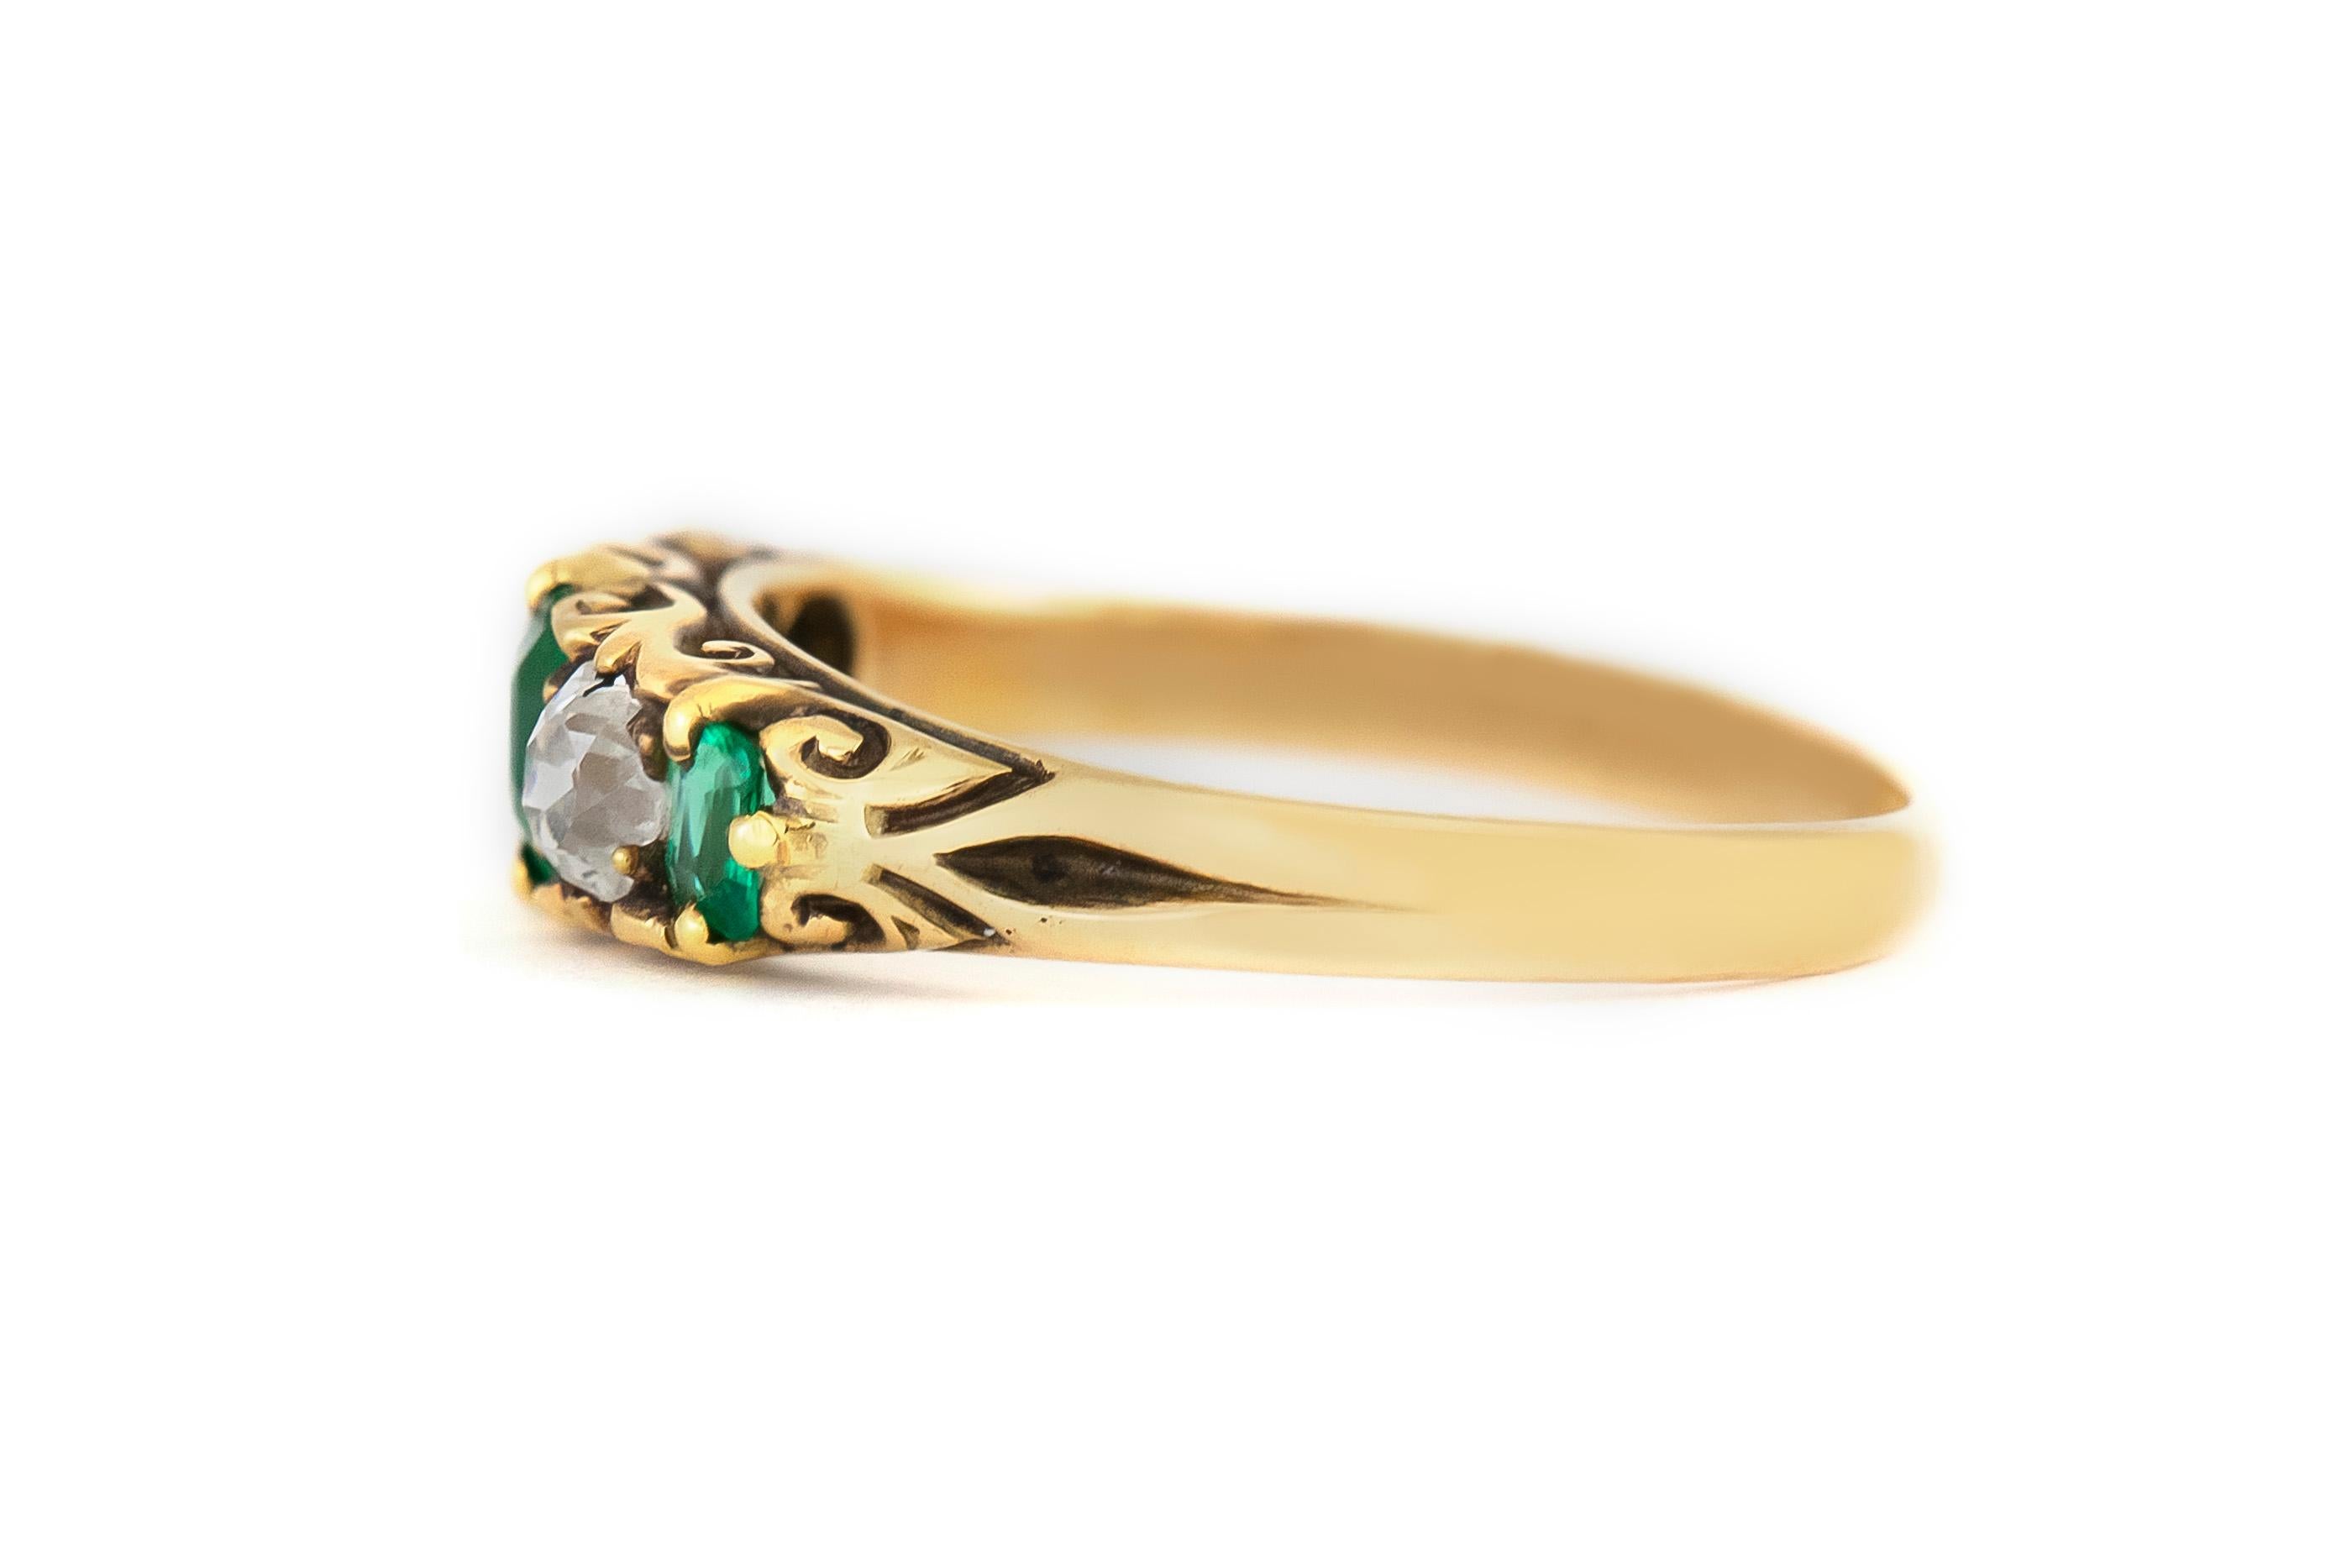 The ring is finely crafted in 18k yellow gold with three emeralds weighing approximately total of 1.20carat and diamonds weighing aapproximately total of 0.80 carat.
Circa 1900.
